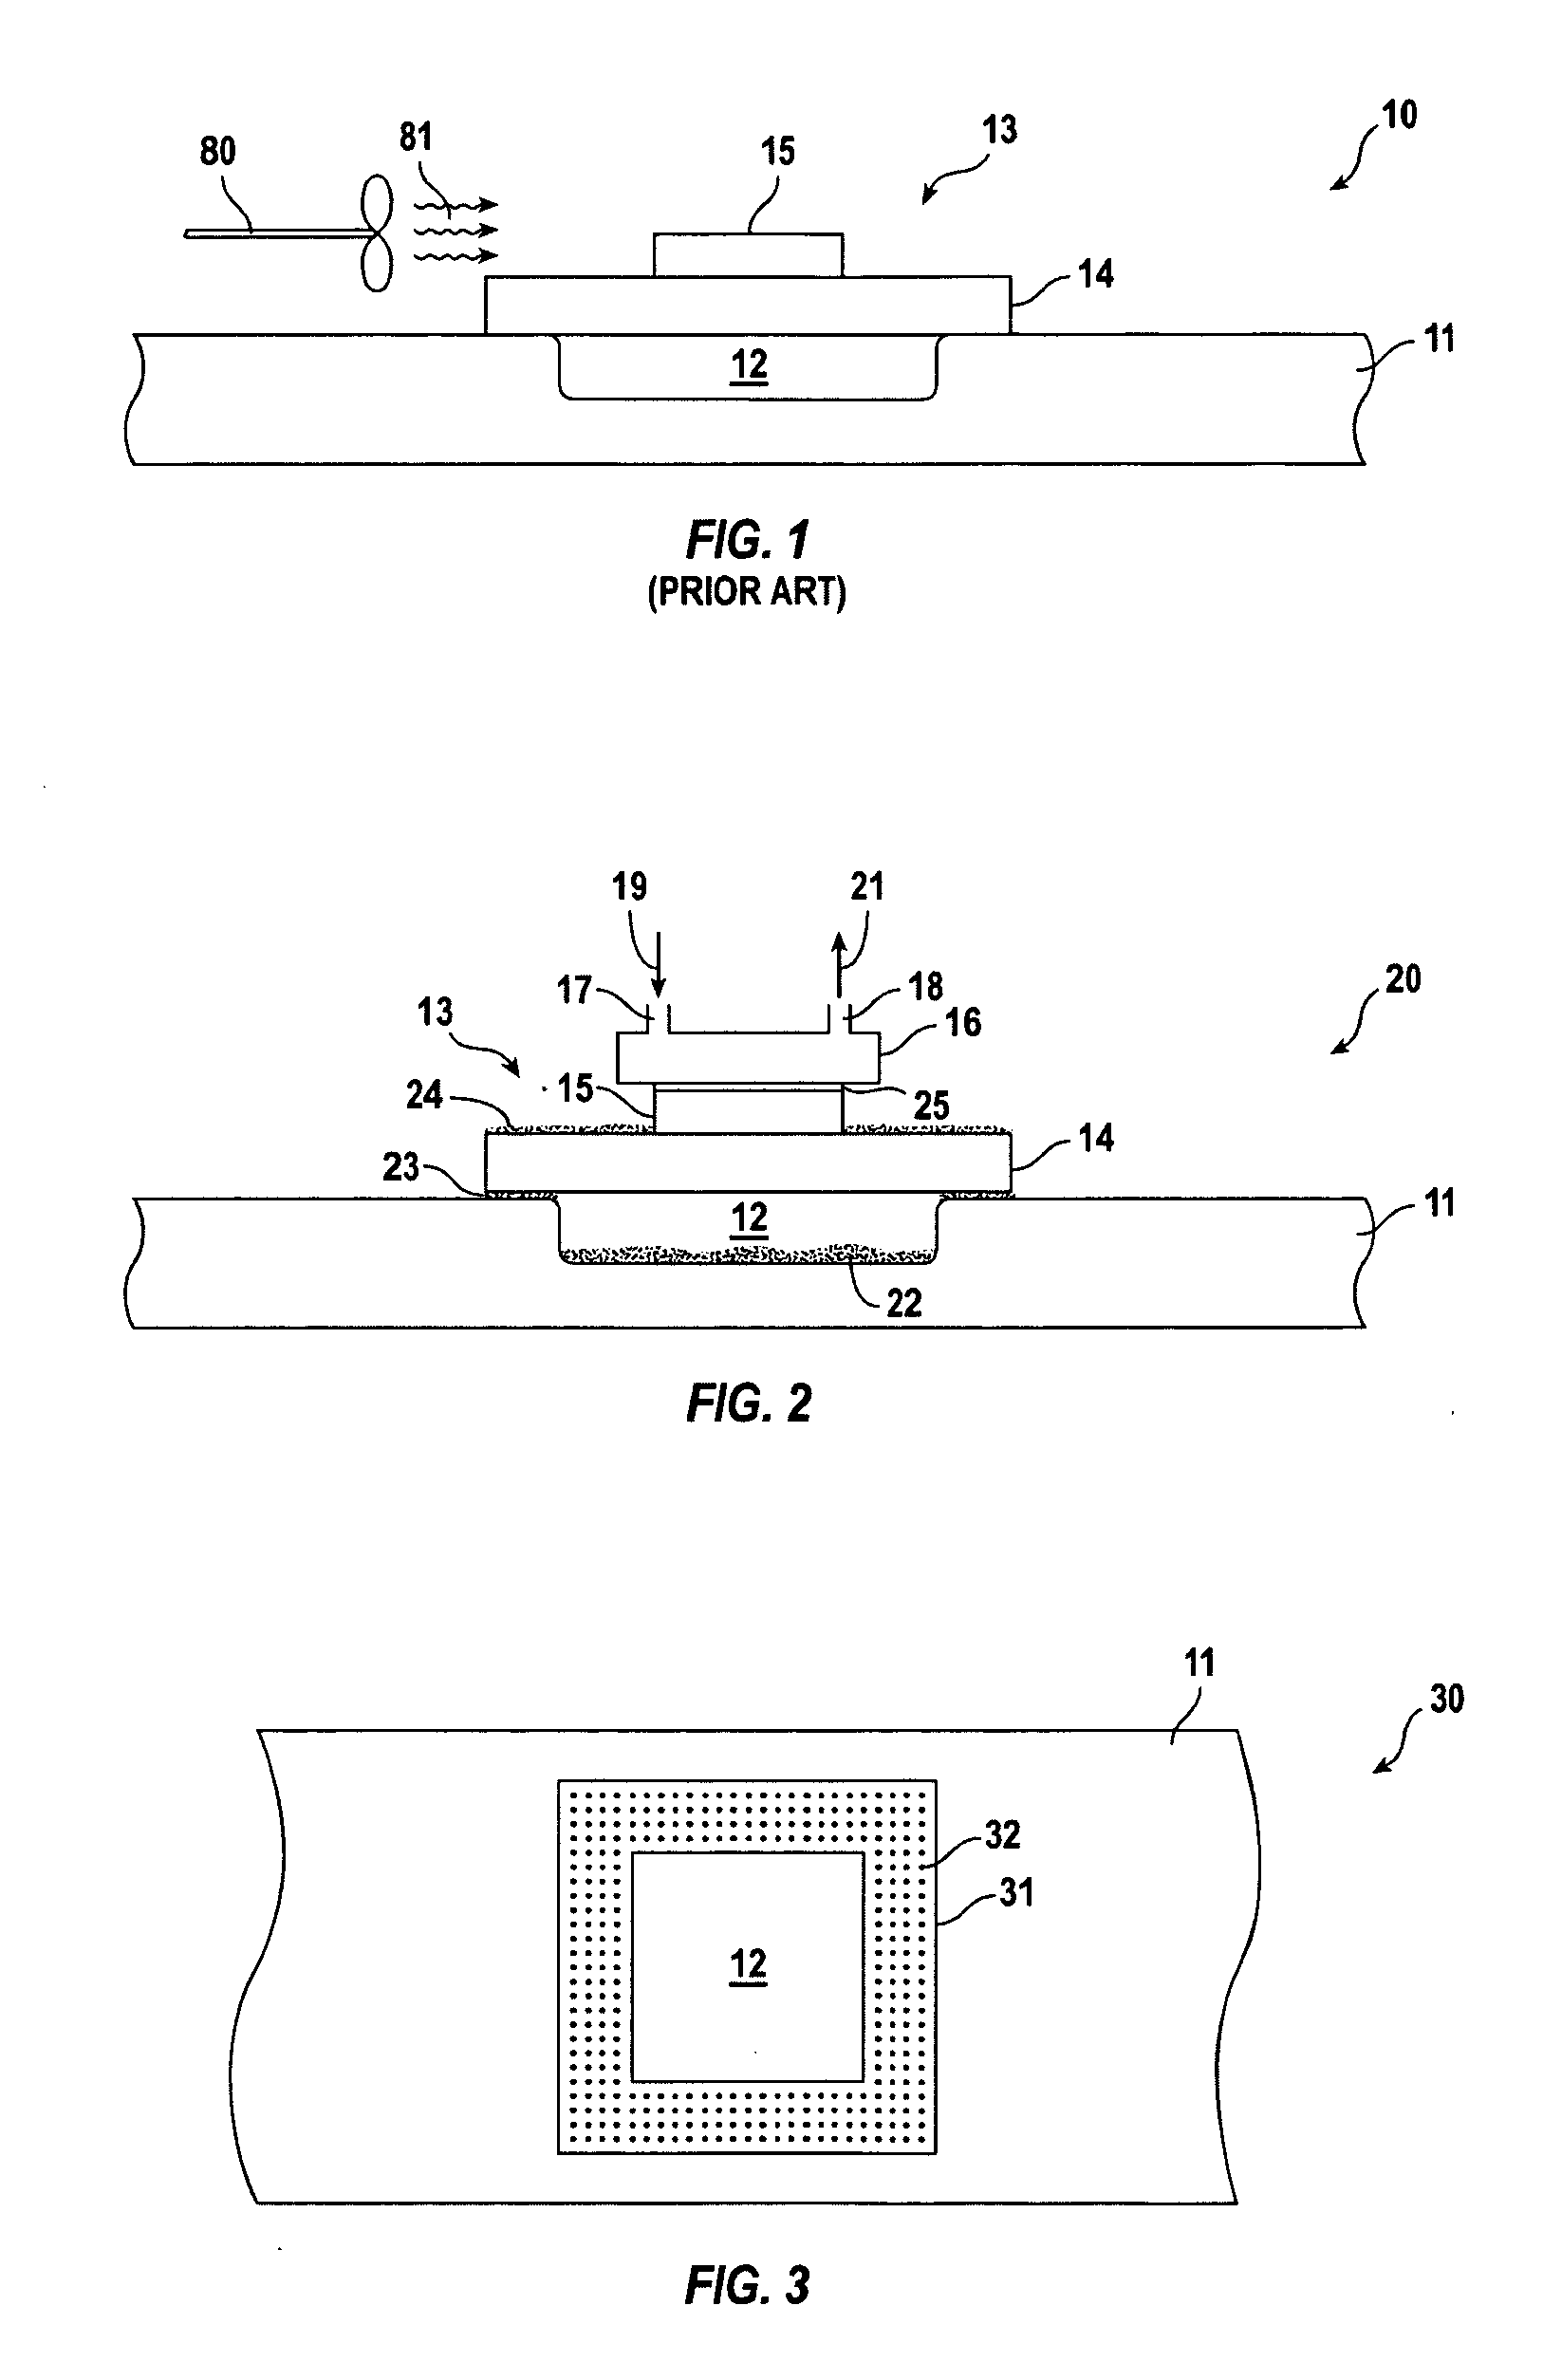 Heat dissipation assembly for computing devices